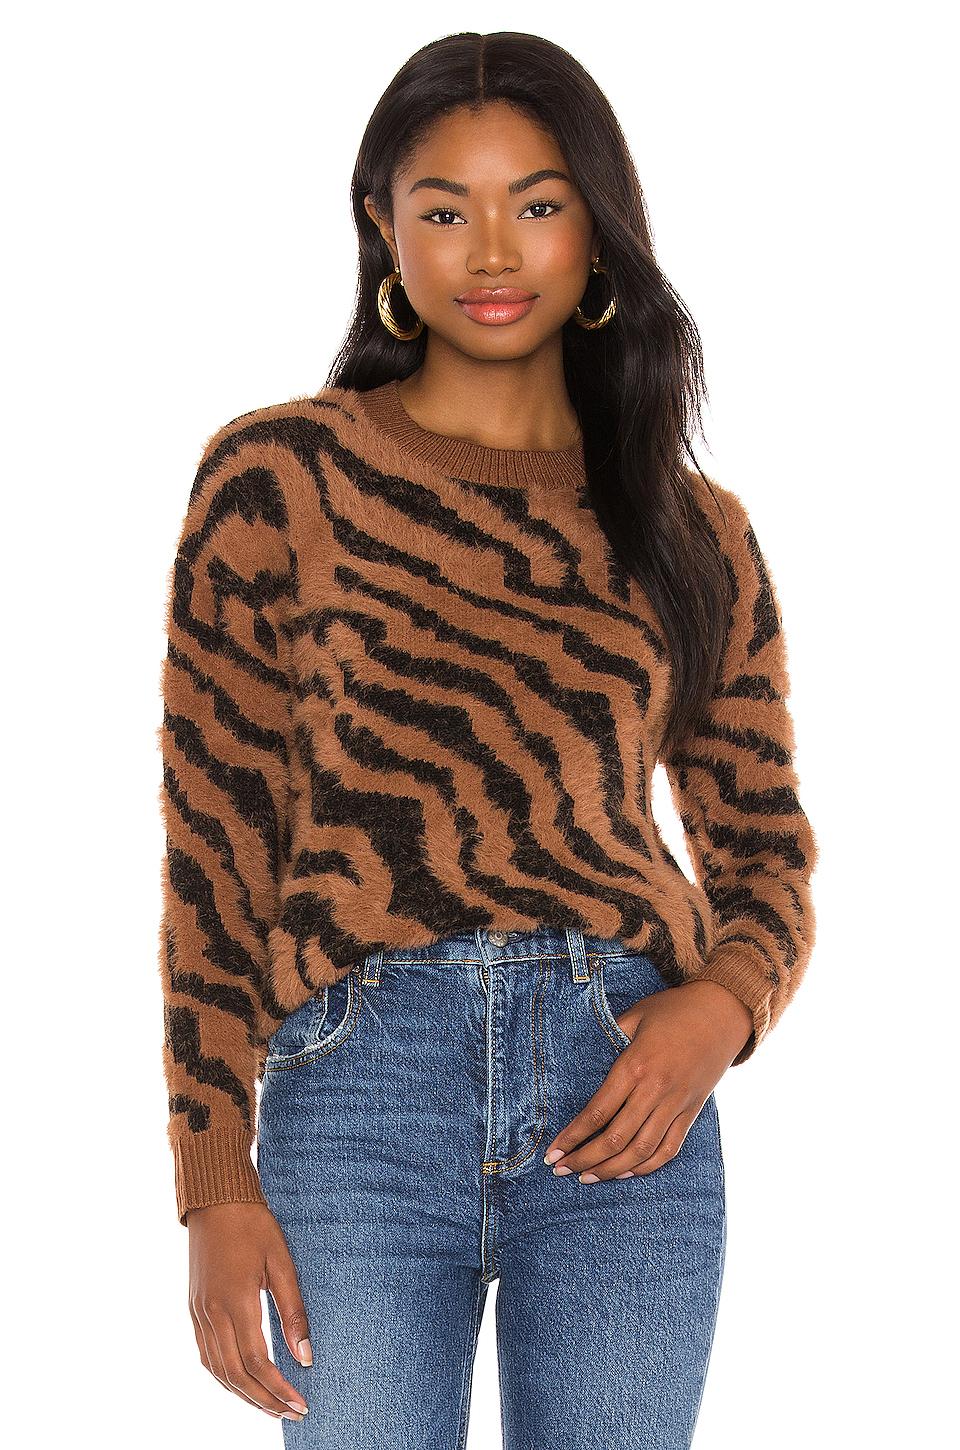 House of Harlow 1960 Synthetic X Revolve Benji Tiger Sweater in Tiger ...